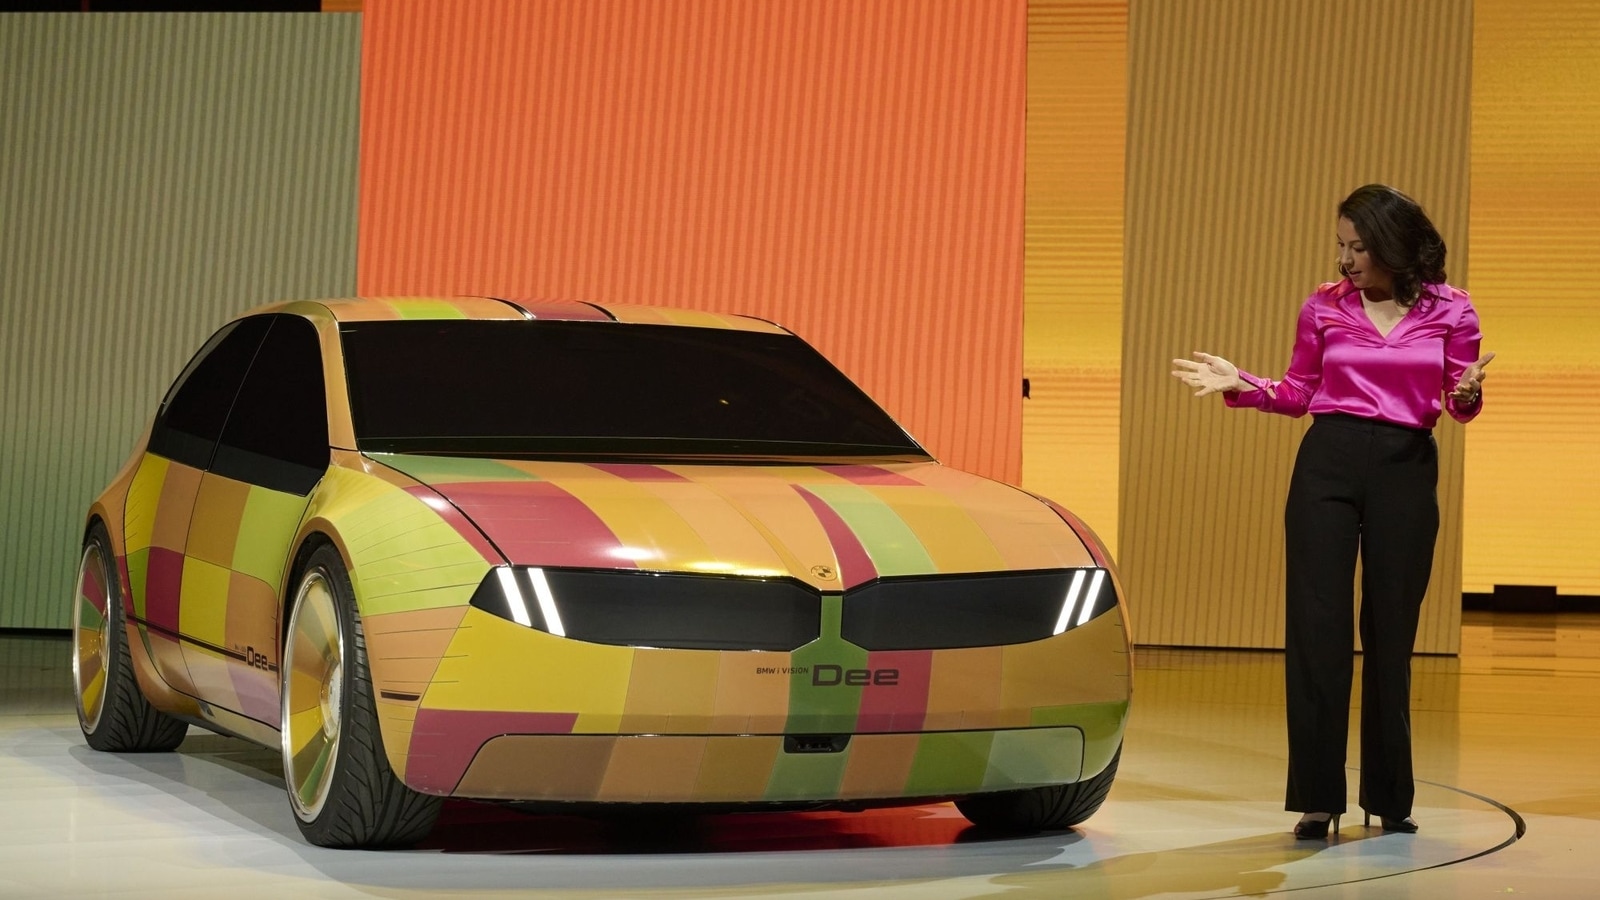 CES 2023: BMW teases a talking car that shifts colors like a